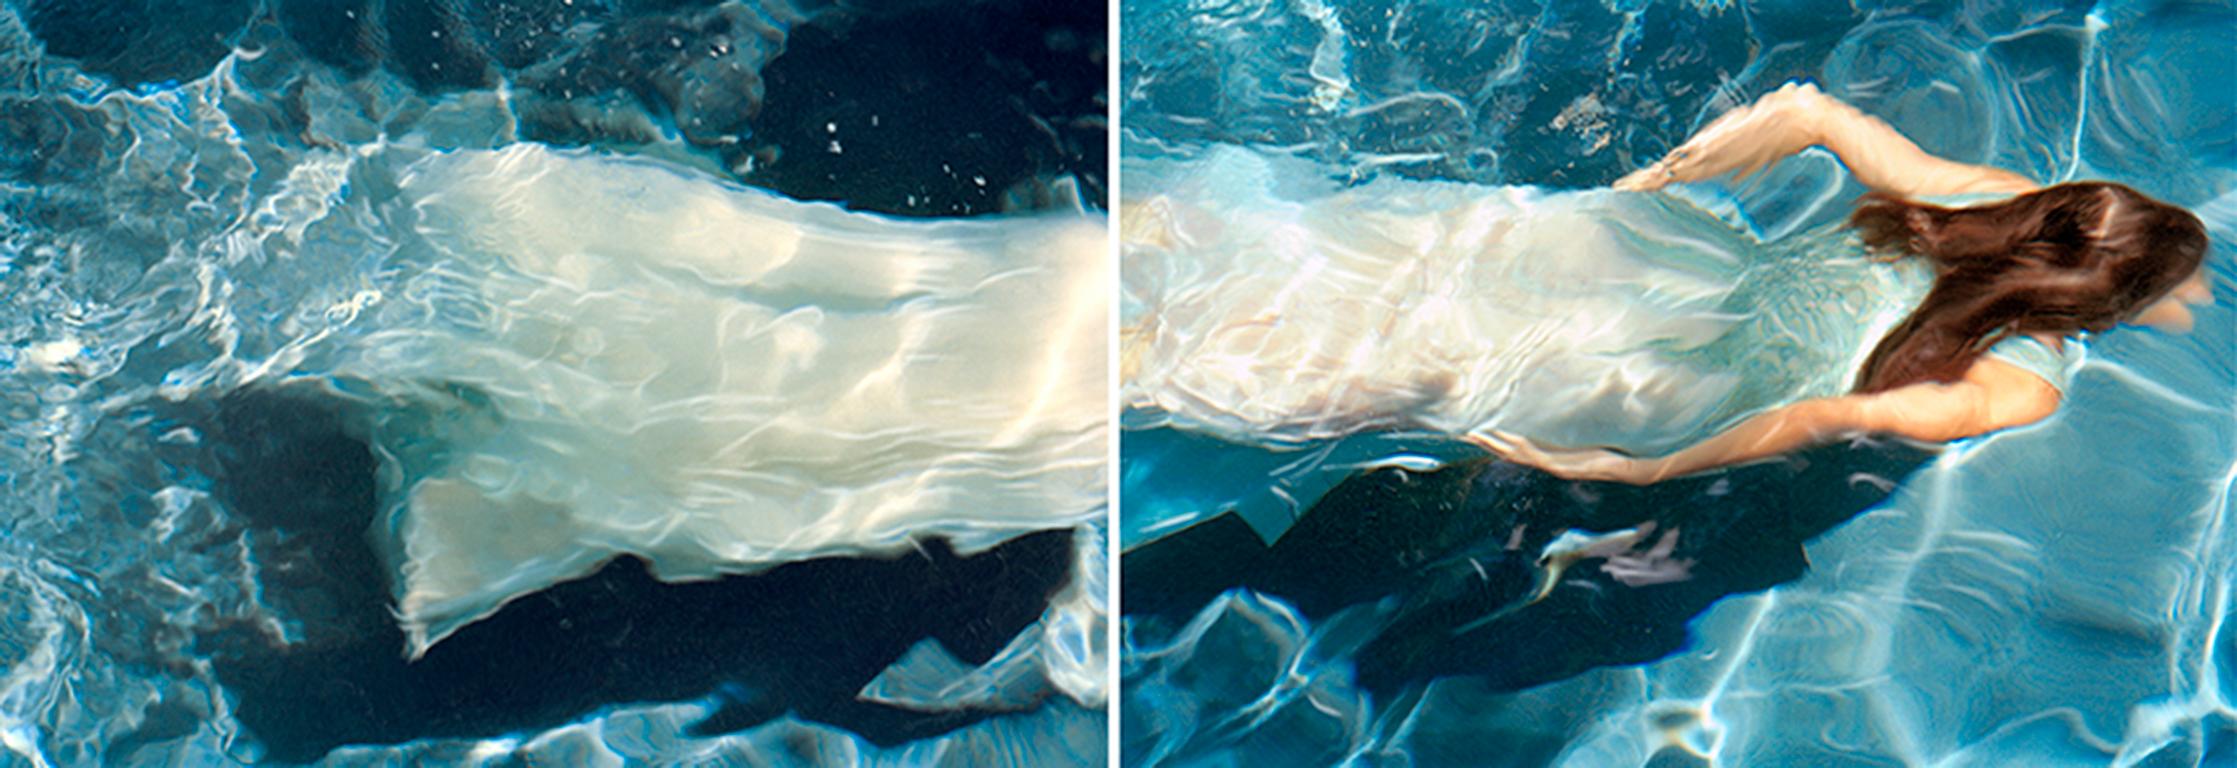 Edition of 15. Chromogenic Print Face-Mounted to Plexiglass, Back-Mounted to Hidden Aluminum Channel.

Cole is known for her sleek, plexiglass presentation style, which enhances the weightlessness of her underwater imagery. The artist's archival